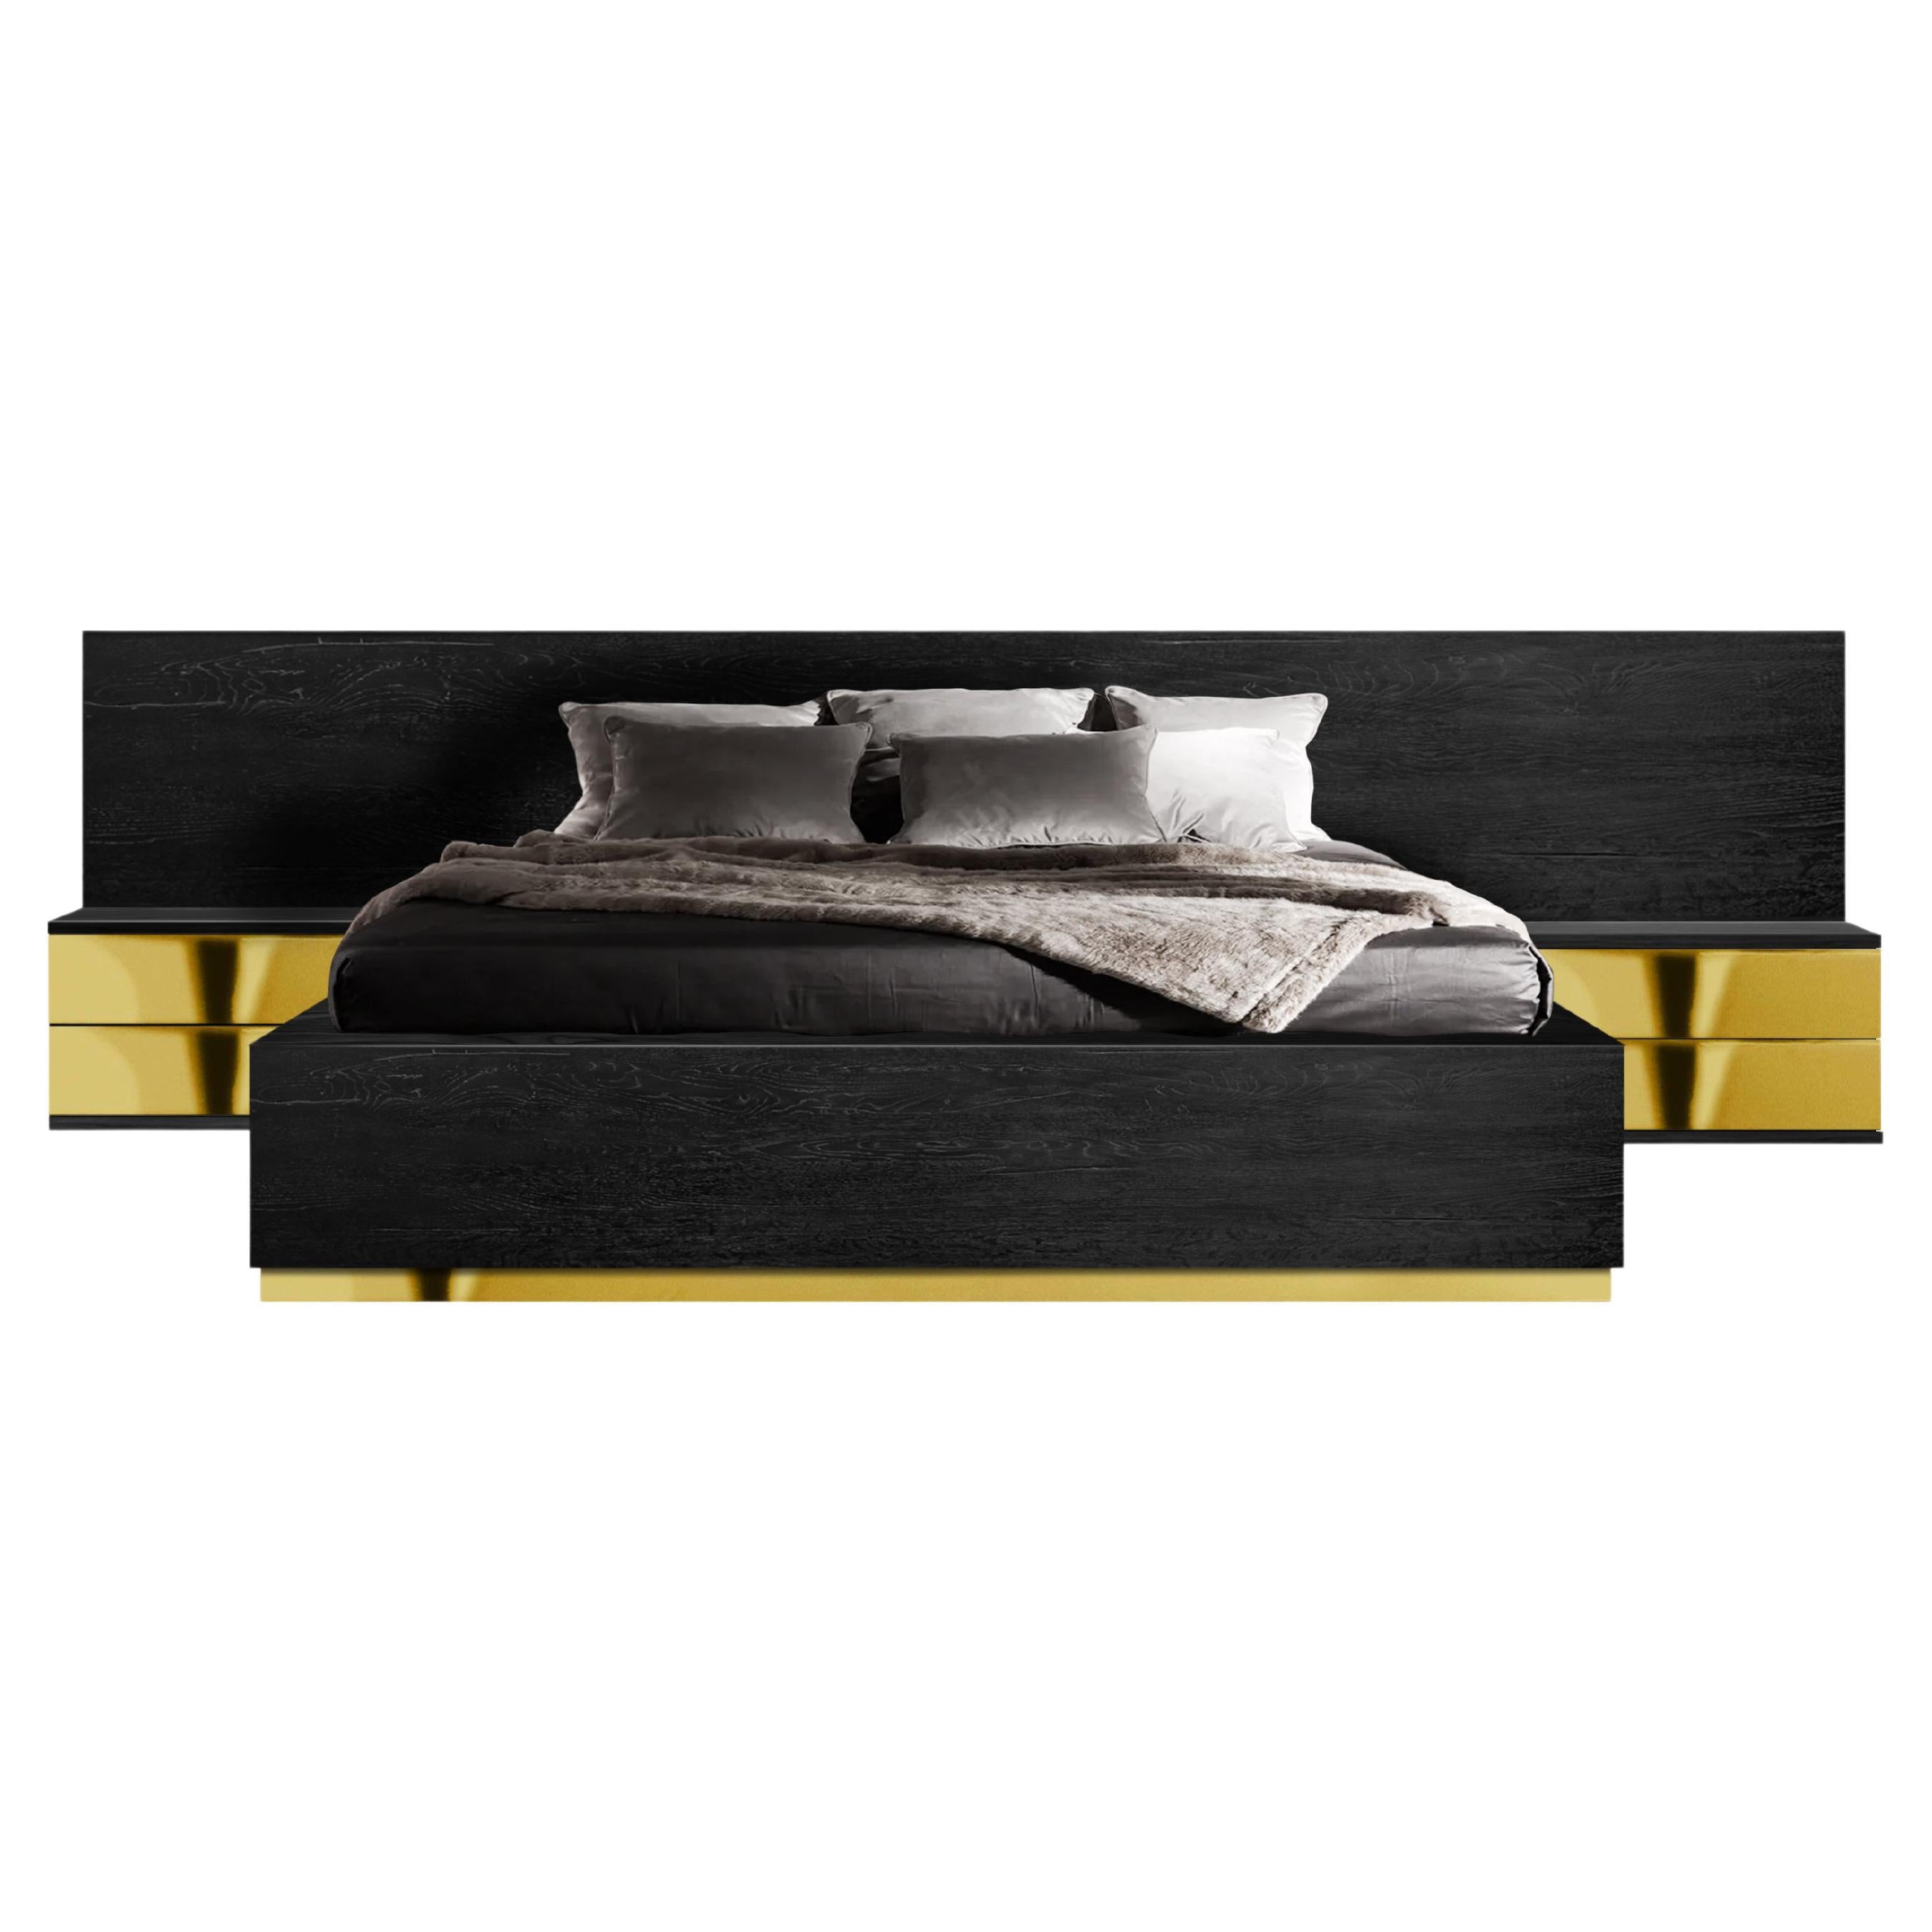 Contemporary Dettifoss Bed frame with bedisde tables, Black, Brass